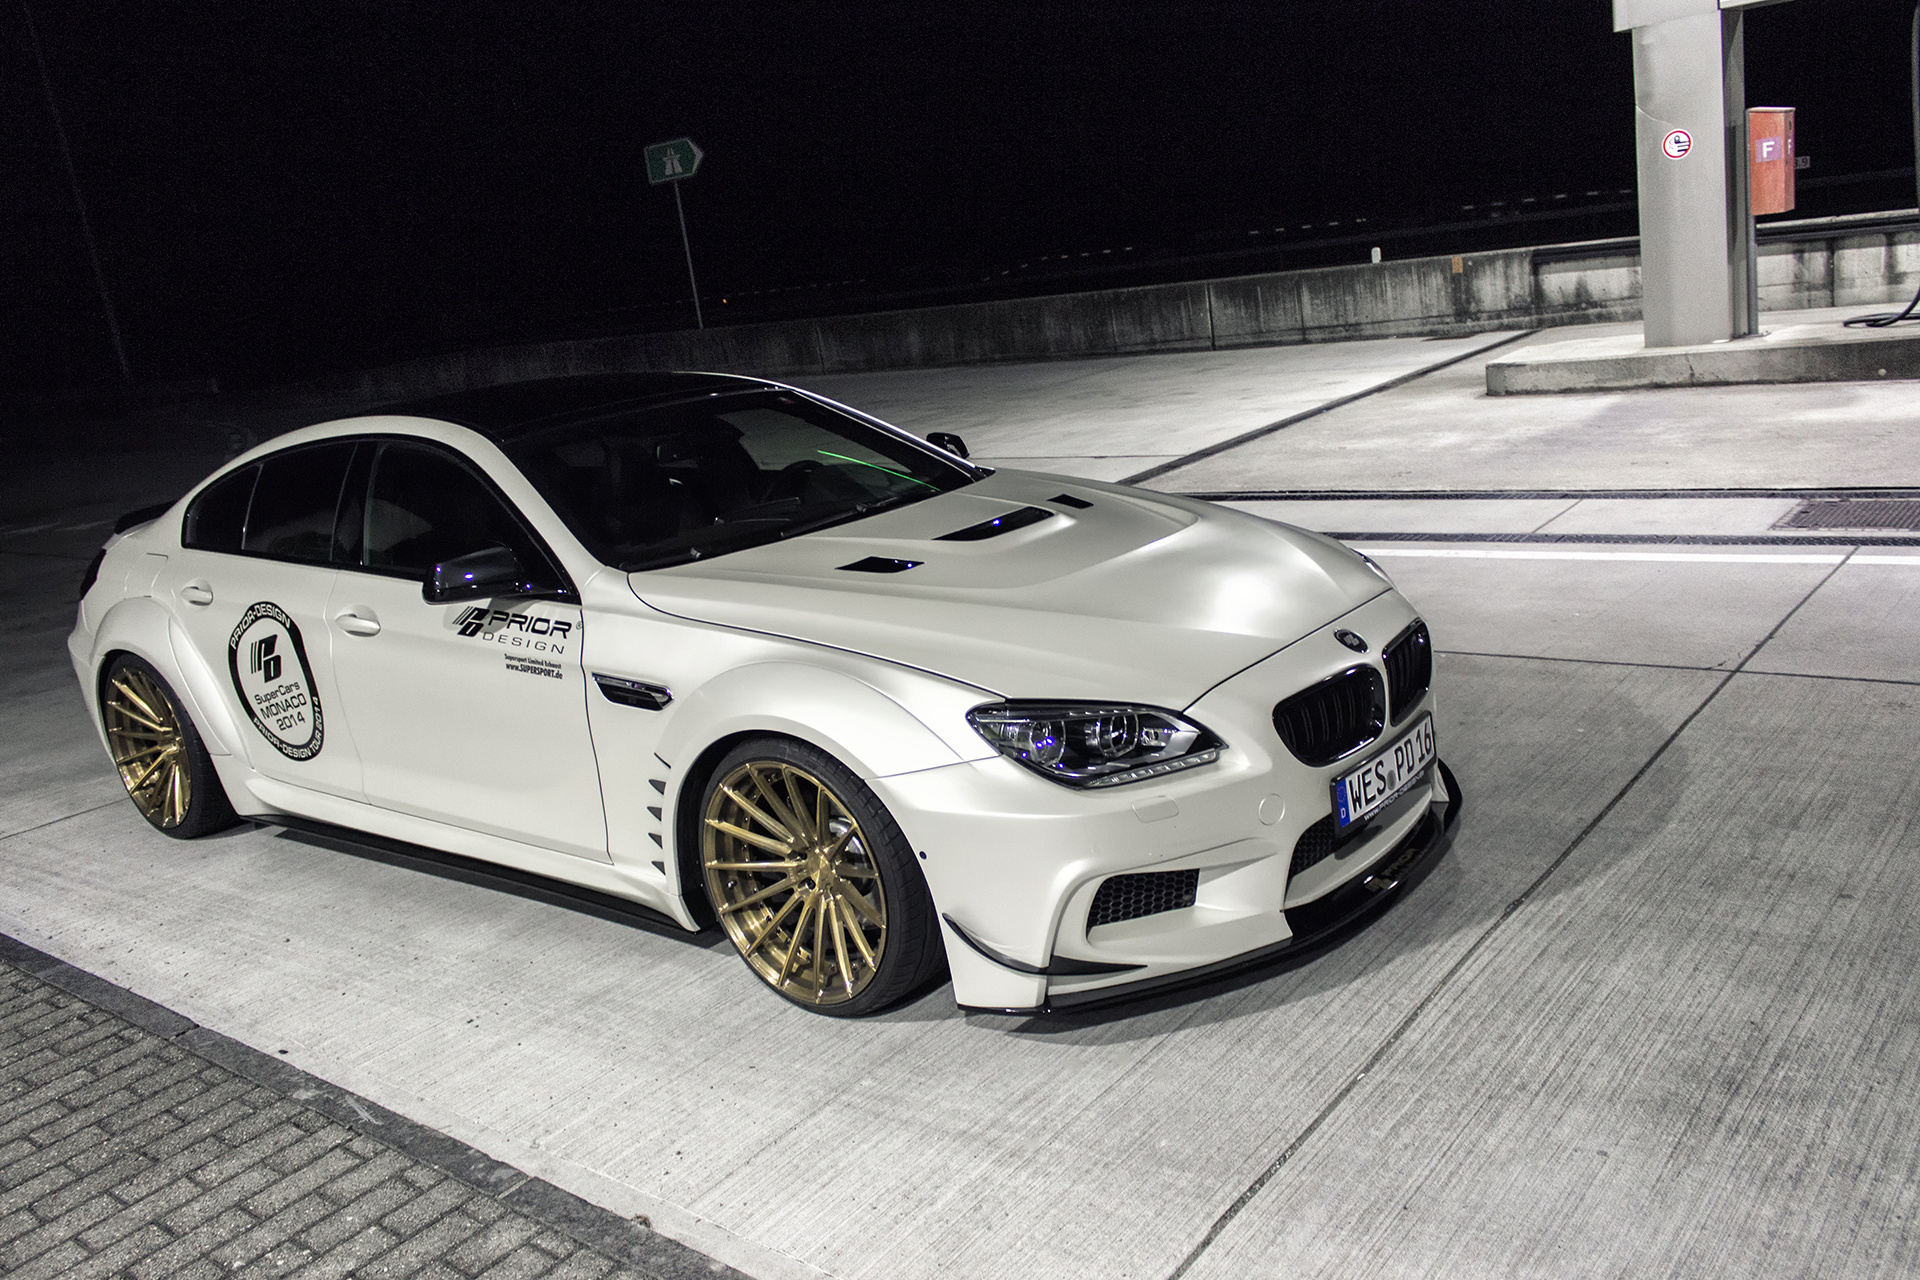 M tuning. BMW m6 f06. BMW m6 f06 Gran Coupe. BMW m6 f12 Gran Coupe. BMW AMG m6.